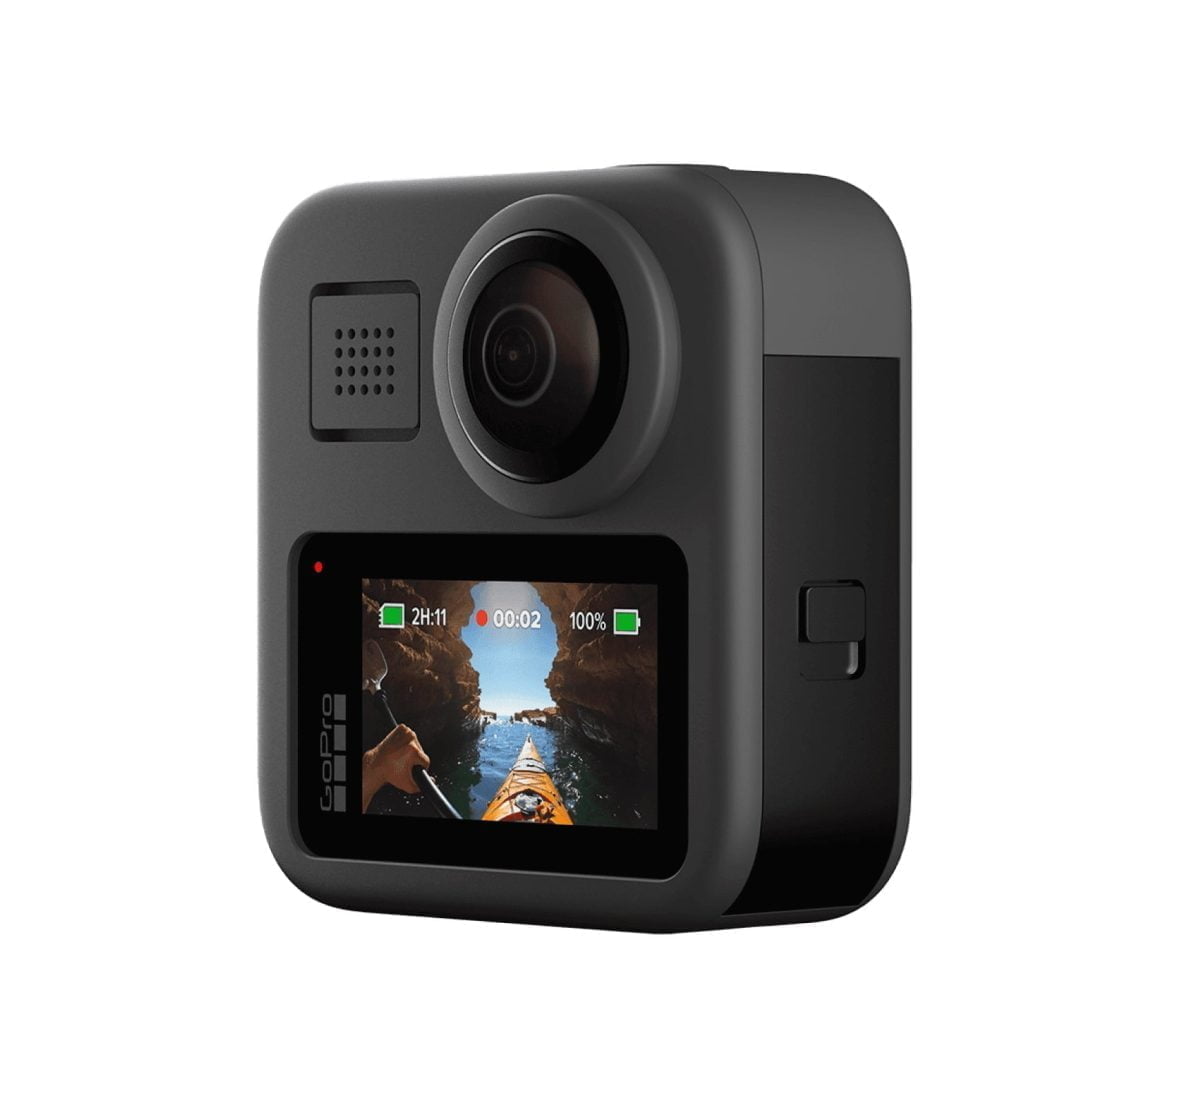 Pdp Max Gallery Angle1 1920 جوبرو &Lt;H1&Gt;Gopro Max - Waterproof 360 Digital Action Camera With Unbreakable Stabilization, Touch Screen And Voice Control - Live Hd Streaming&Lt;/H1&Gt; &Lt;Div Class=&Quot;Descriptionmodule_Bundles-Container__Skafo Col-Xlarge-6 Col-Large-6 Col-Medium-4 Col-Small-4 Col-Xsmall-8&Quot;&Gt; &Lt;Div Class=&Quot;Descriptionmodule_Detailslist__321Ps&Quot;&Gt; &Lt;P Class=&Quot;Header Header-5&Quot;&Gt;Product Details&Lt;/P&Gt; &Lt;Div Class=&Quot;Row Descriptionmodule_Bundles__3Ah0V Descriptionmodule_Detailitem__1Q3Hp&Quot;&Gt; &Lt;Ul&Gt; &Lt;Li Class=&Quot;Paragraph Paragraph-Small&Quot;&Gt;Shoot Hero Mode Or Go With 360 Mode For Stunning 6K.⁵&Lt;/Li&Gt; &Lt;Li Class=&Quot;Paragraph Paragraph-Small&Quot;&Gt;Unbreakable Stabilization From Max Hypersmooth&Lt;/Li&Gt; &Lt;Li Class=&Quot;Paragraph Paragraph-Small&Quot;&Gt;Waterproof To 16Ft + Built Tough&Lt;/Li&Gt; &Lt;Li Class=&Quot;Paragraph Paragraph-Small&Quot;&Gt;Premium 360 + Stereo Audio From 6 Mics&Lt;/Li&Gt; &Lt;Li Class=&Quot;Paragraph Paragraph-Small&Quot;&Gt;Vlog To The Max With 1080P Live Streaming&Lt;/Li&Gt; &Lt;Li Class=&Quot;Paragraph Paragraph-Small&Quot;&Gt;Max Timewarp, Powerpano, 4 Digital Lenses + So Many Other Features To Nail Any Shot&Lt;/Li&Gt; &Lt;Li Class=&Quot;Paragraph Paragraph-Small&Quot;&Gt;Compatible With Quik App&Lt;/Li&Gt; &Lt;Li Class=&Quot;Paragraph Paragraph-Small&Quot;&Gt;Compatible With Over 30 Mounts + Accessories&Lt;/Li&Gt; &Lt;/Ul&Gt; &Lt;/Div&Gt; &Lt;/Div&Gt; &Lt;/Div&Gt; &Nbsp; Gopro Max Gopro Max - Waterproof 360 Digital Action Camera With Unbreakable Stabilization, Touch Screen And Voice Control - Live Hd Streaming